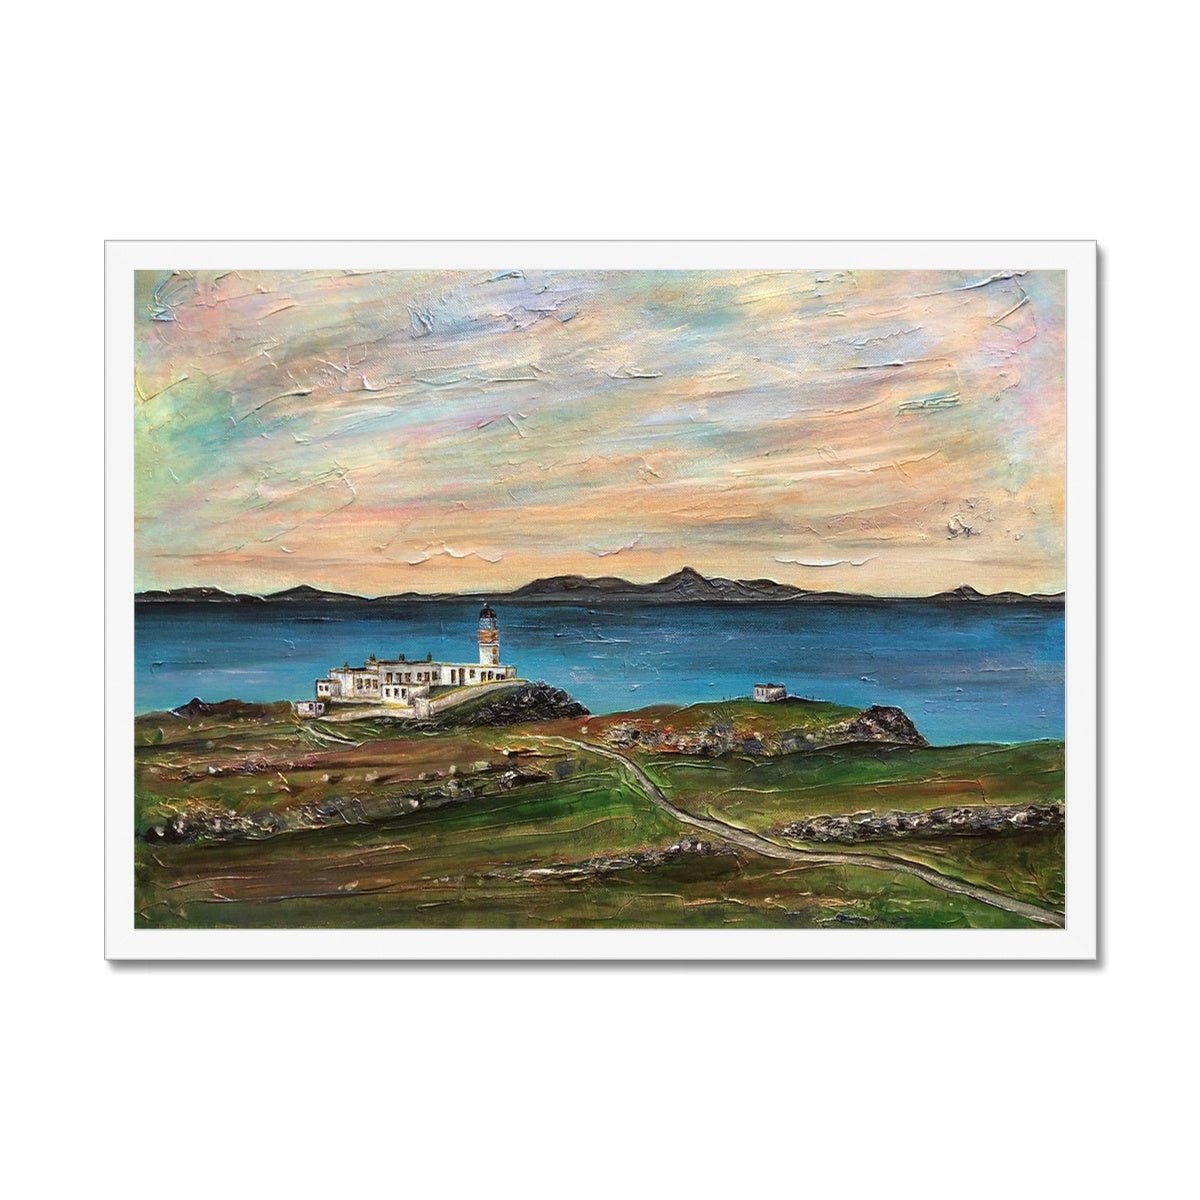 Neist Point Skye Painting | Framed Prints From Scotland-Framed Prints-Skye Art Gallery-A2 Landscape-White Frame-Paintings, Prints, Homeware, Art Gifts From Scotland By Scottish Artist Kevin Hunter